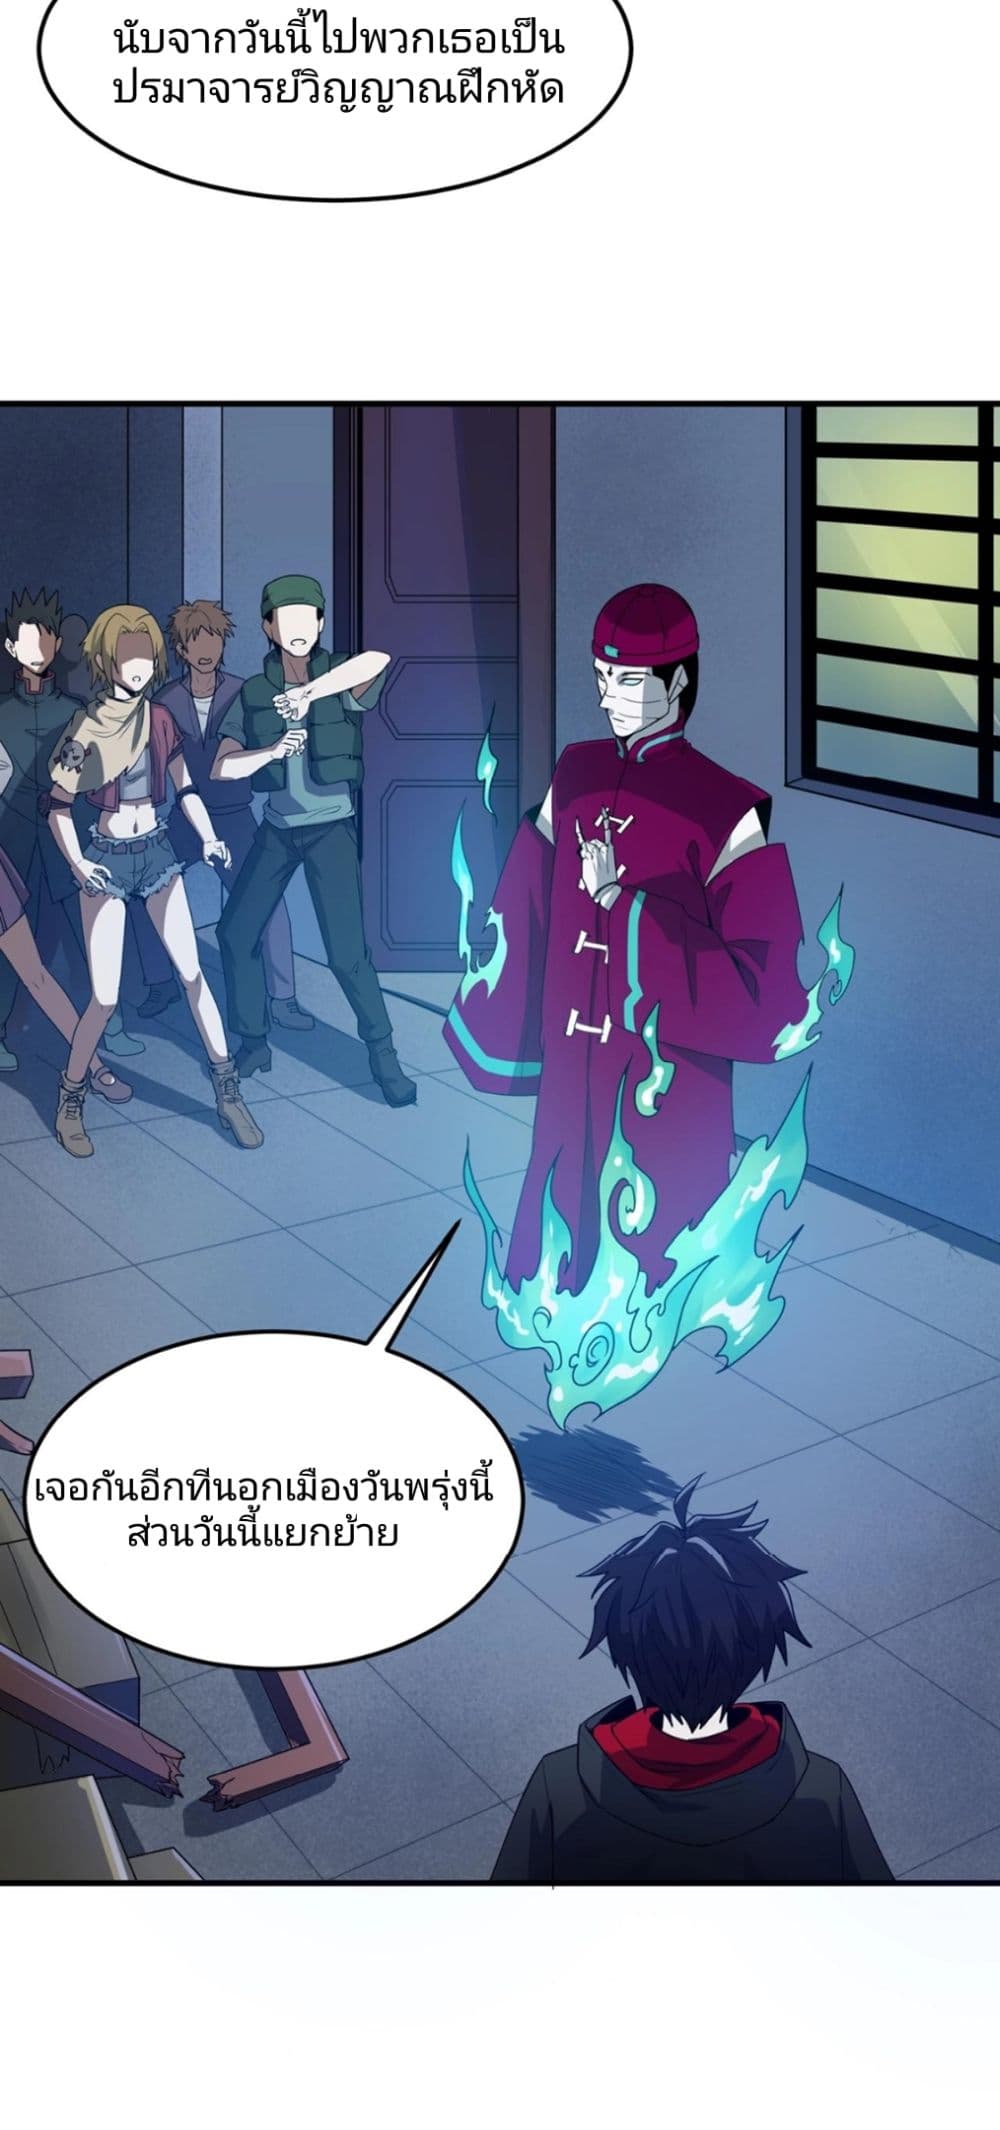 The Age of Ghost Spirits à¸à¸­à¸à¸à¸µà¹ 2 (35)